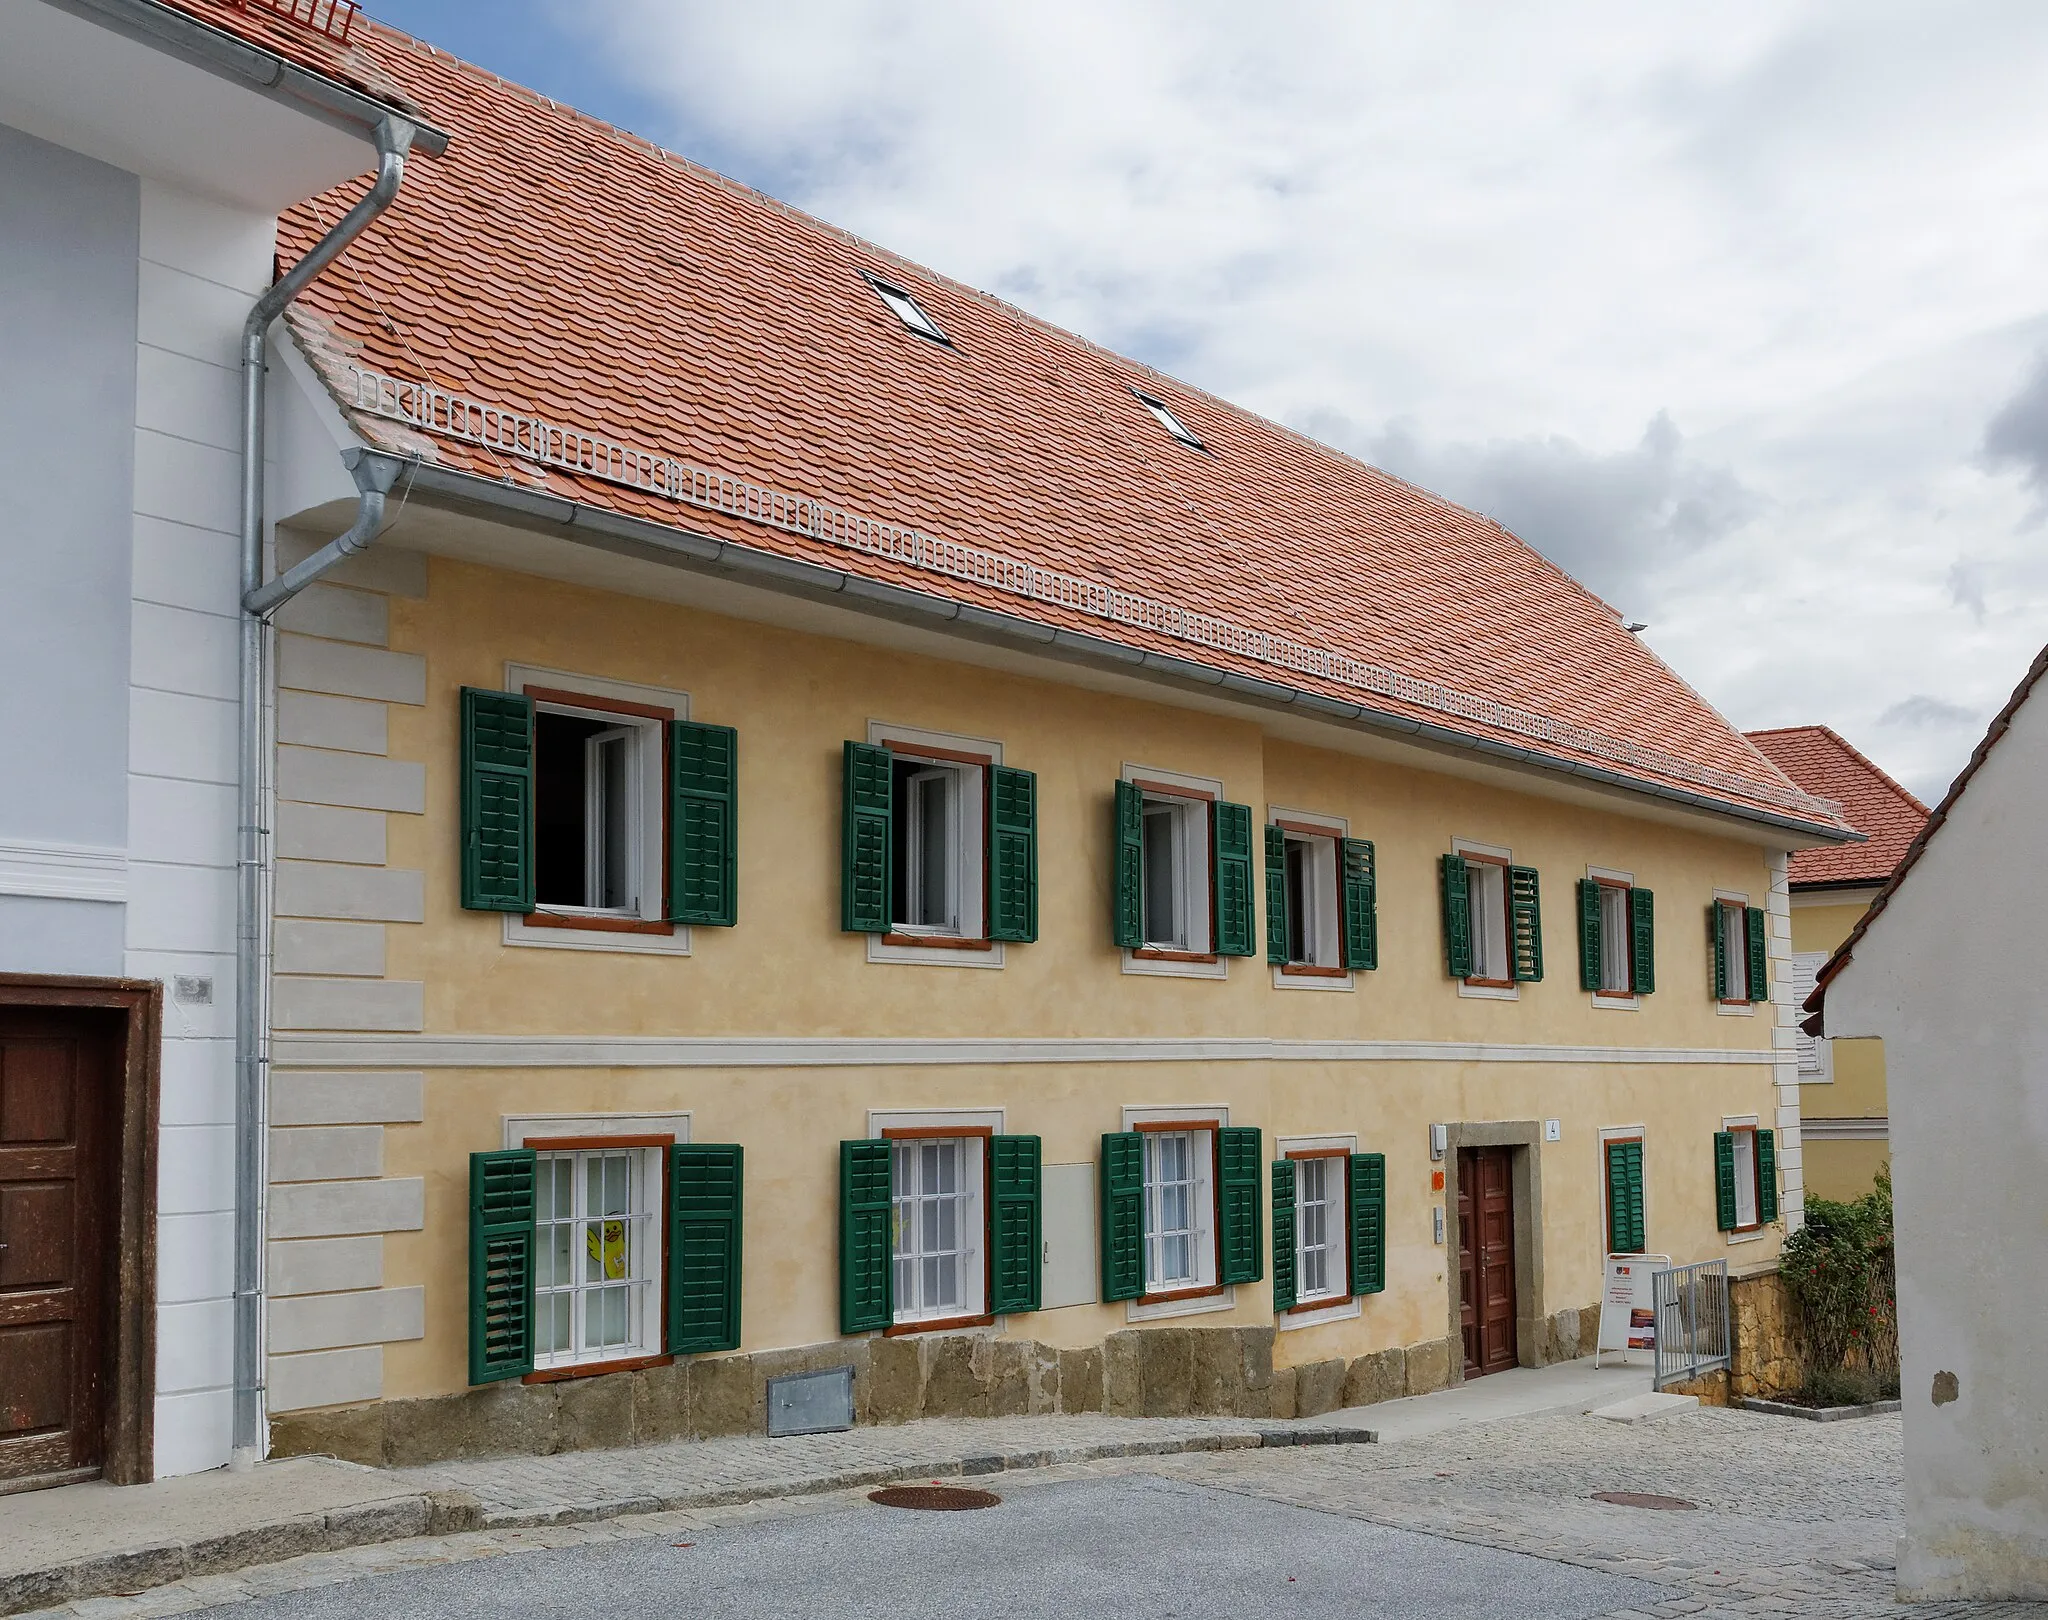 Photo showing: Residential building in Straden, Styria, Austria